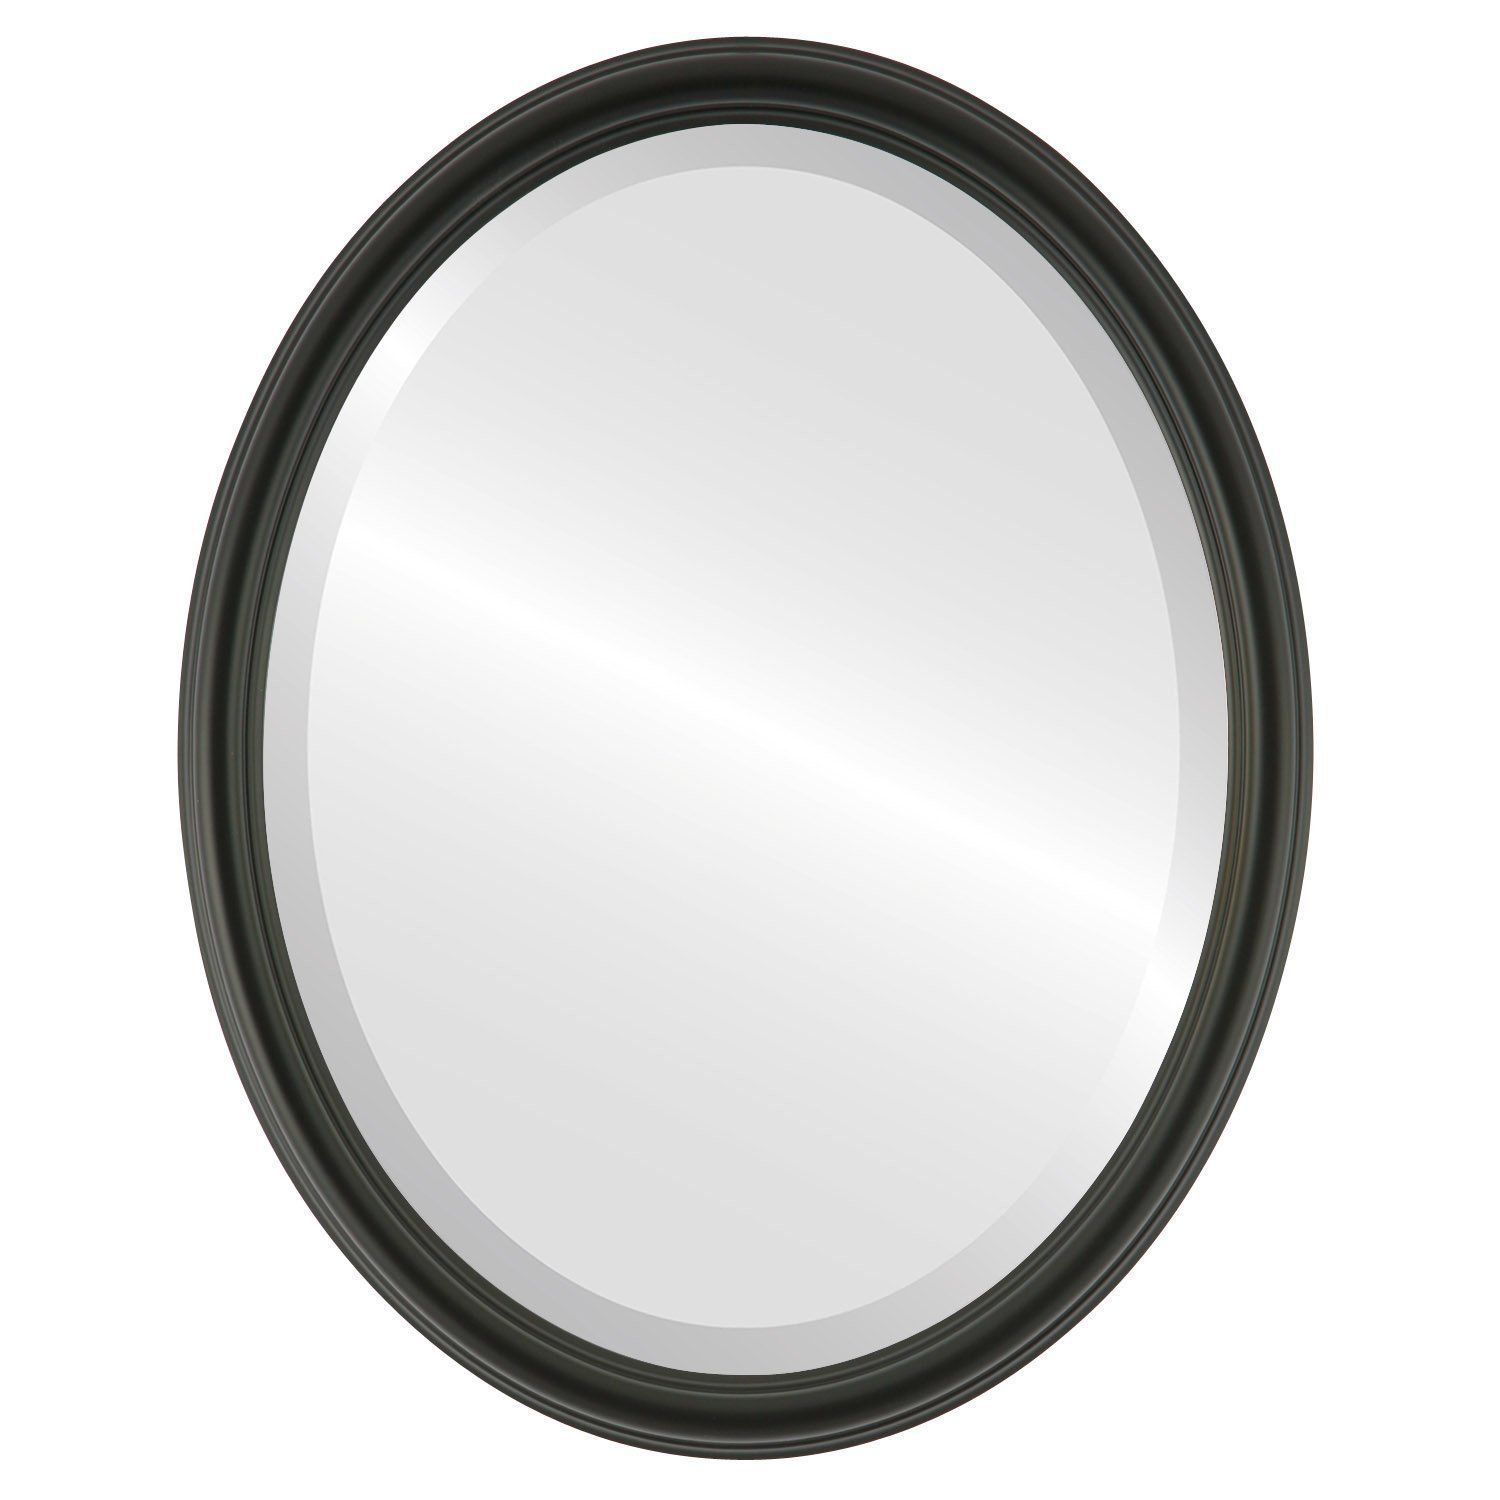 Saratoga Oval In Matte Black >>> Check Out The Imagevisiting The Within Matte Black Metal Oval Wall Mirrors (View 3 of 15)